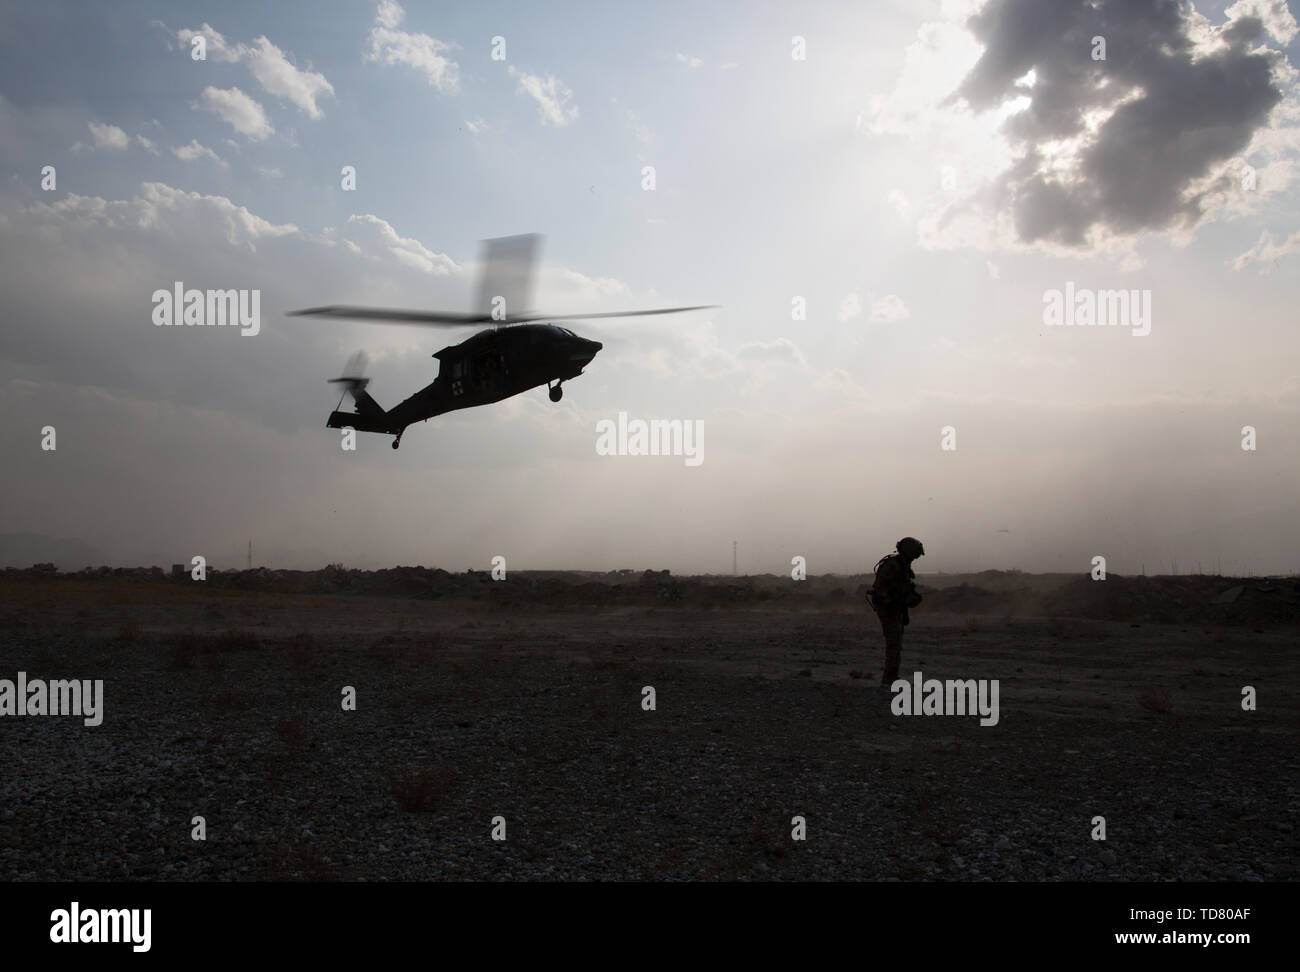 Bagram, Afghanistan. 14th Oct, 2018. A Medevac Blackhawk UH-60 during a training mission.FOB(forward operating base) Dahlke is a new austere US Army base, as of Spring 2018, in Afghanistan that began with a large presence of soldiers from the 101st Combat Aviation Brigade. Dahlke is strategically located about 60 miles South of Kabul. Every type of air support mission is done from here, from medevac to resupply to combat. Dahlke was built from the ground up over the past year by the soldiers stationed here. It is built on the South end of the now abandoned Shank Base. In 2014 Shank was h Stock Photo